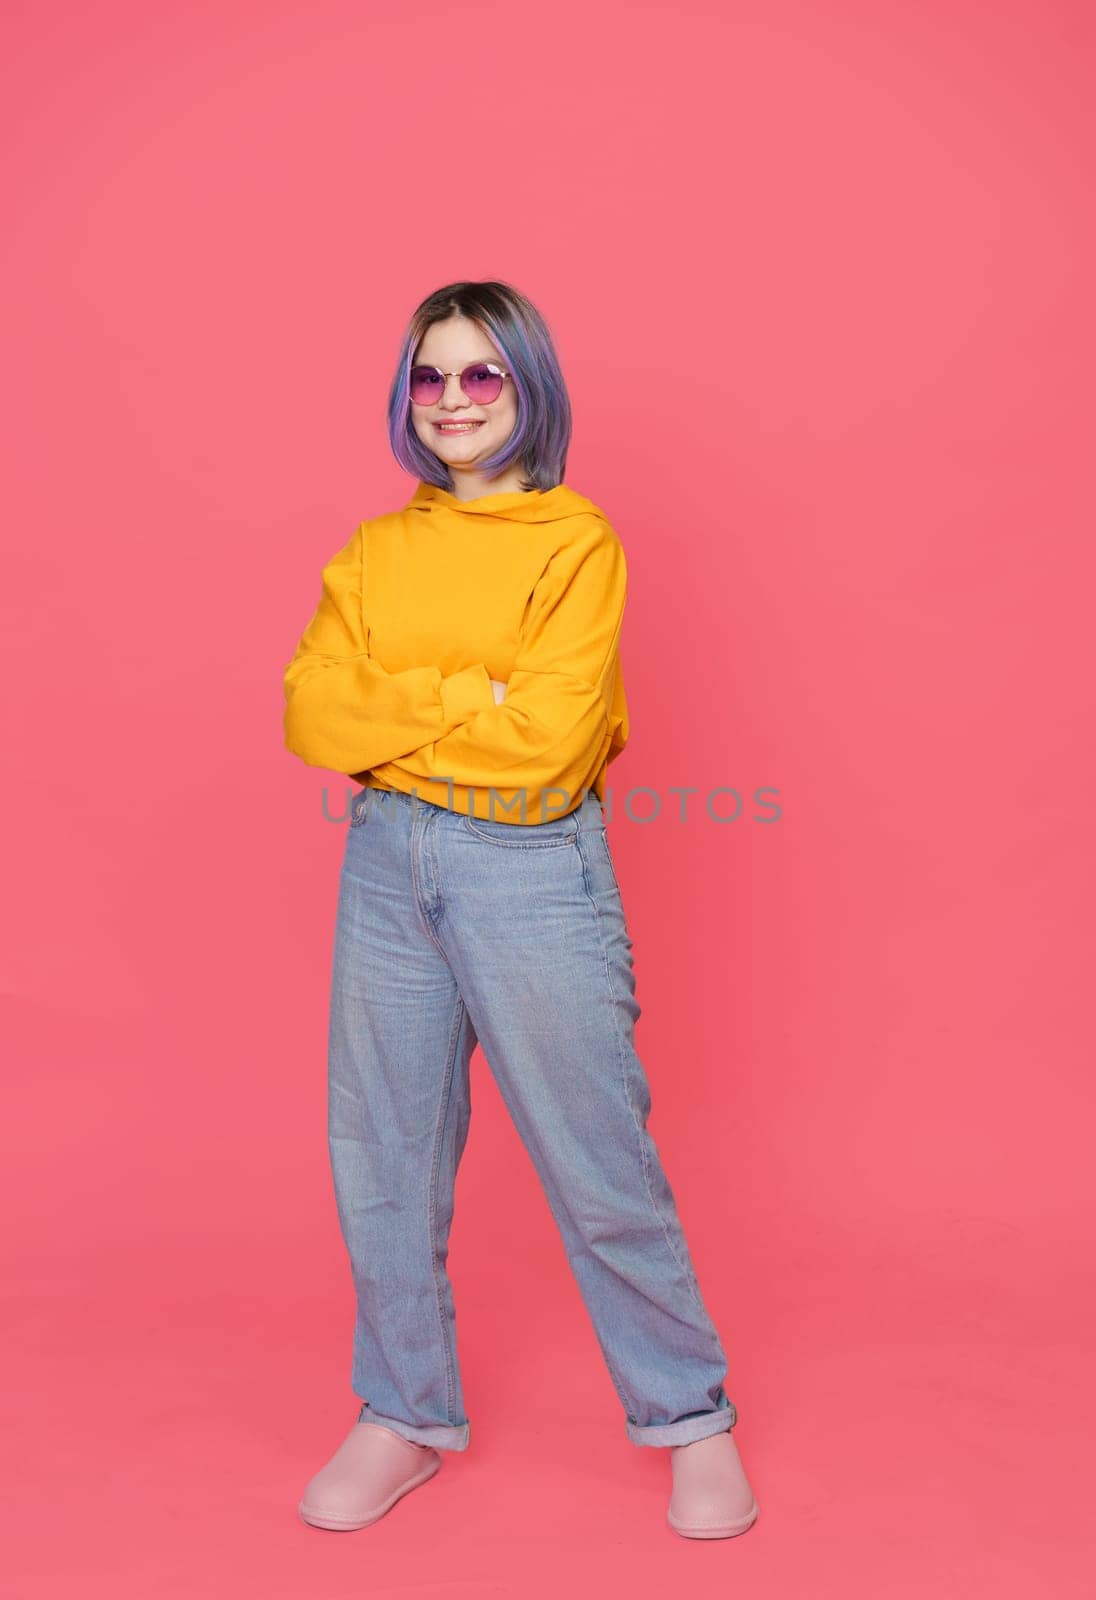 Smiling Asian teenager in crossed hands position with colored hair stylishly dressed in yellow jacket, standing on pink background. Youth culture, girl's expressive style and personality in contemporary and modern setting. Full-length portrait, by LipikStockMedia